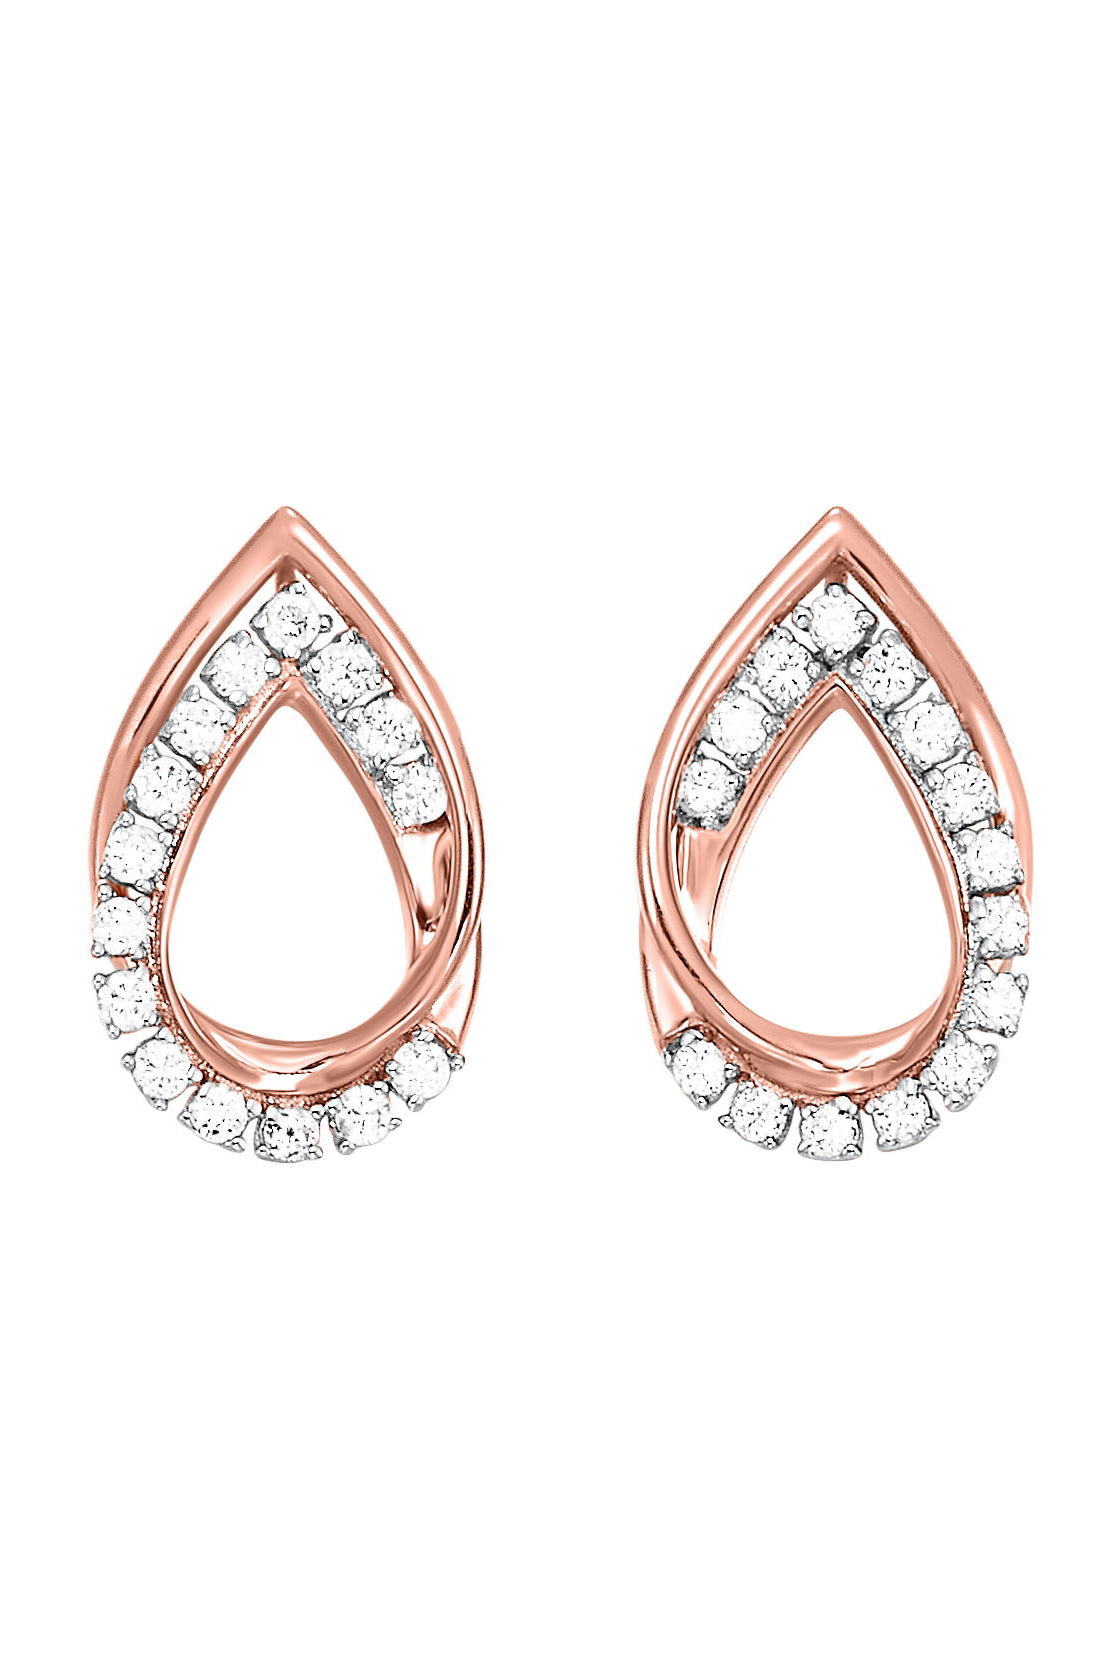 10kt pink gold & diamond studded fashion earrings  - 1/6 ctw